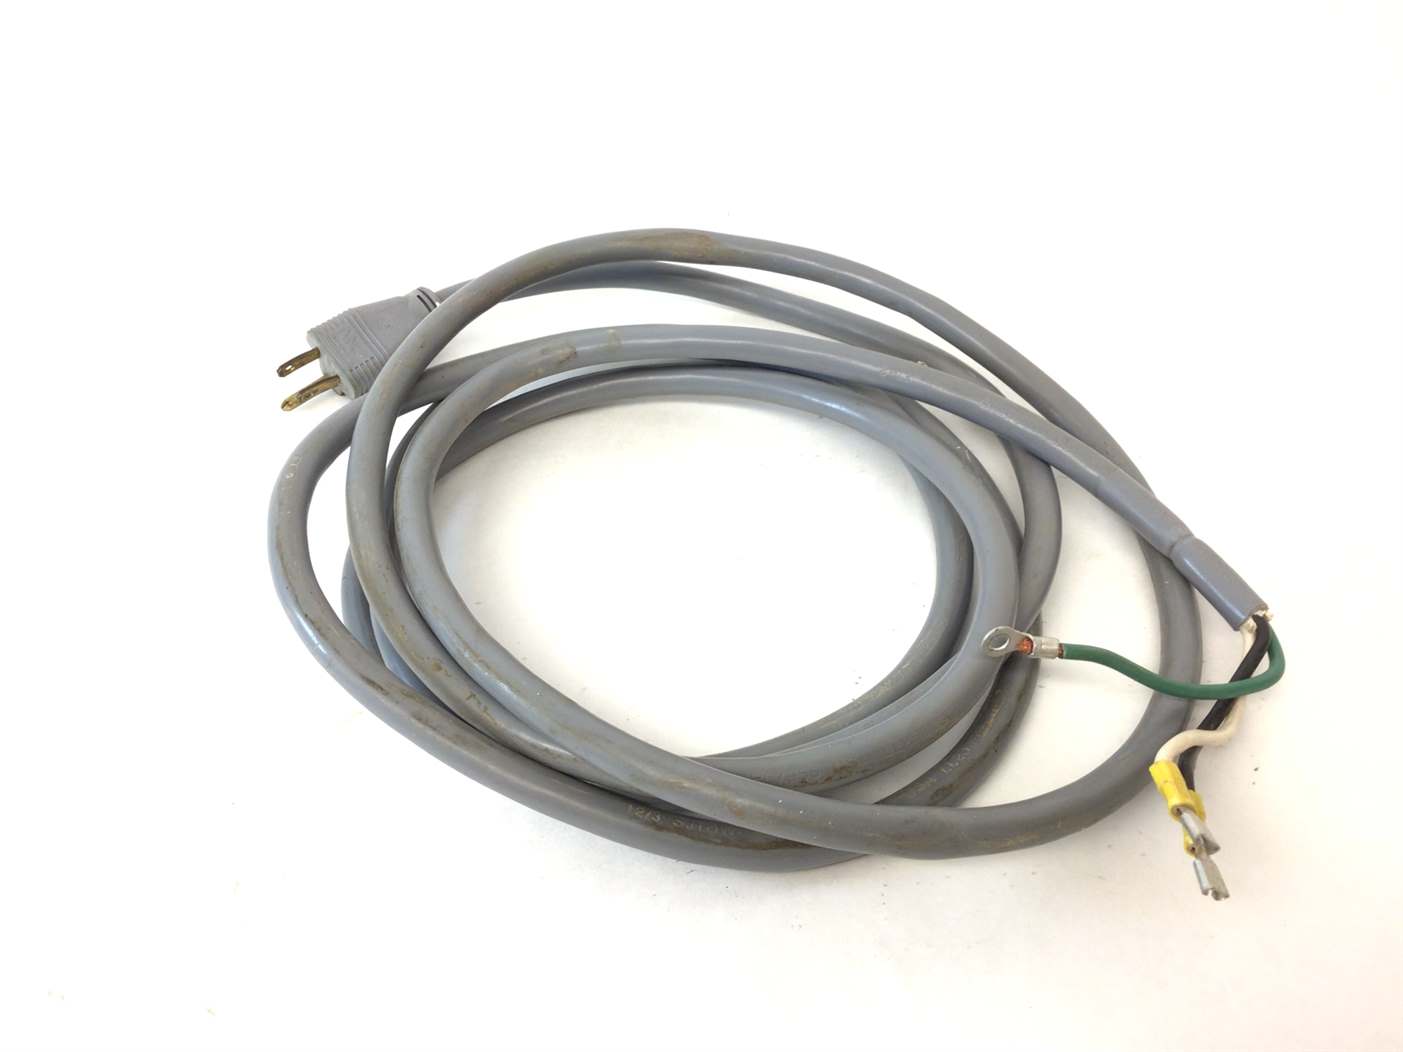 Hardwired Power Cord 15A (Used)